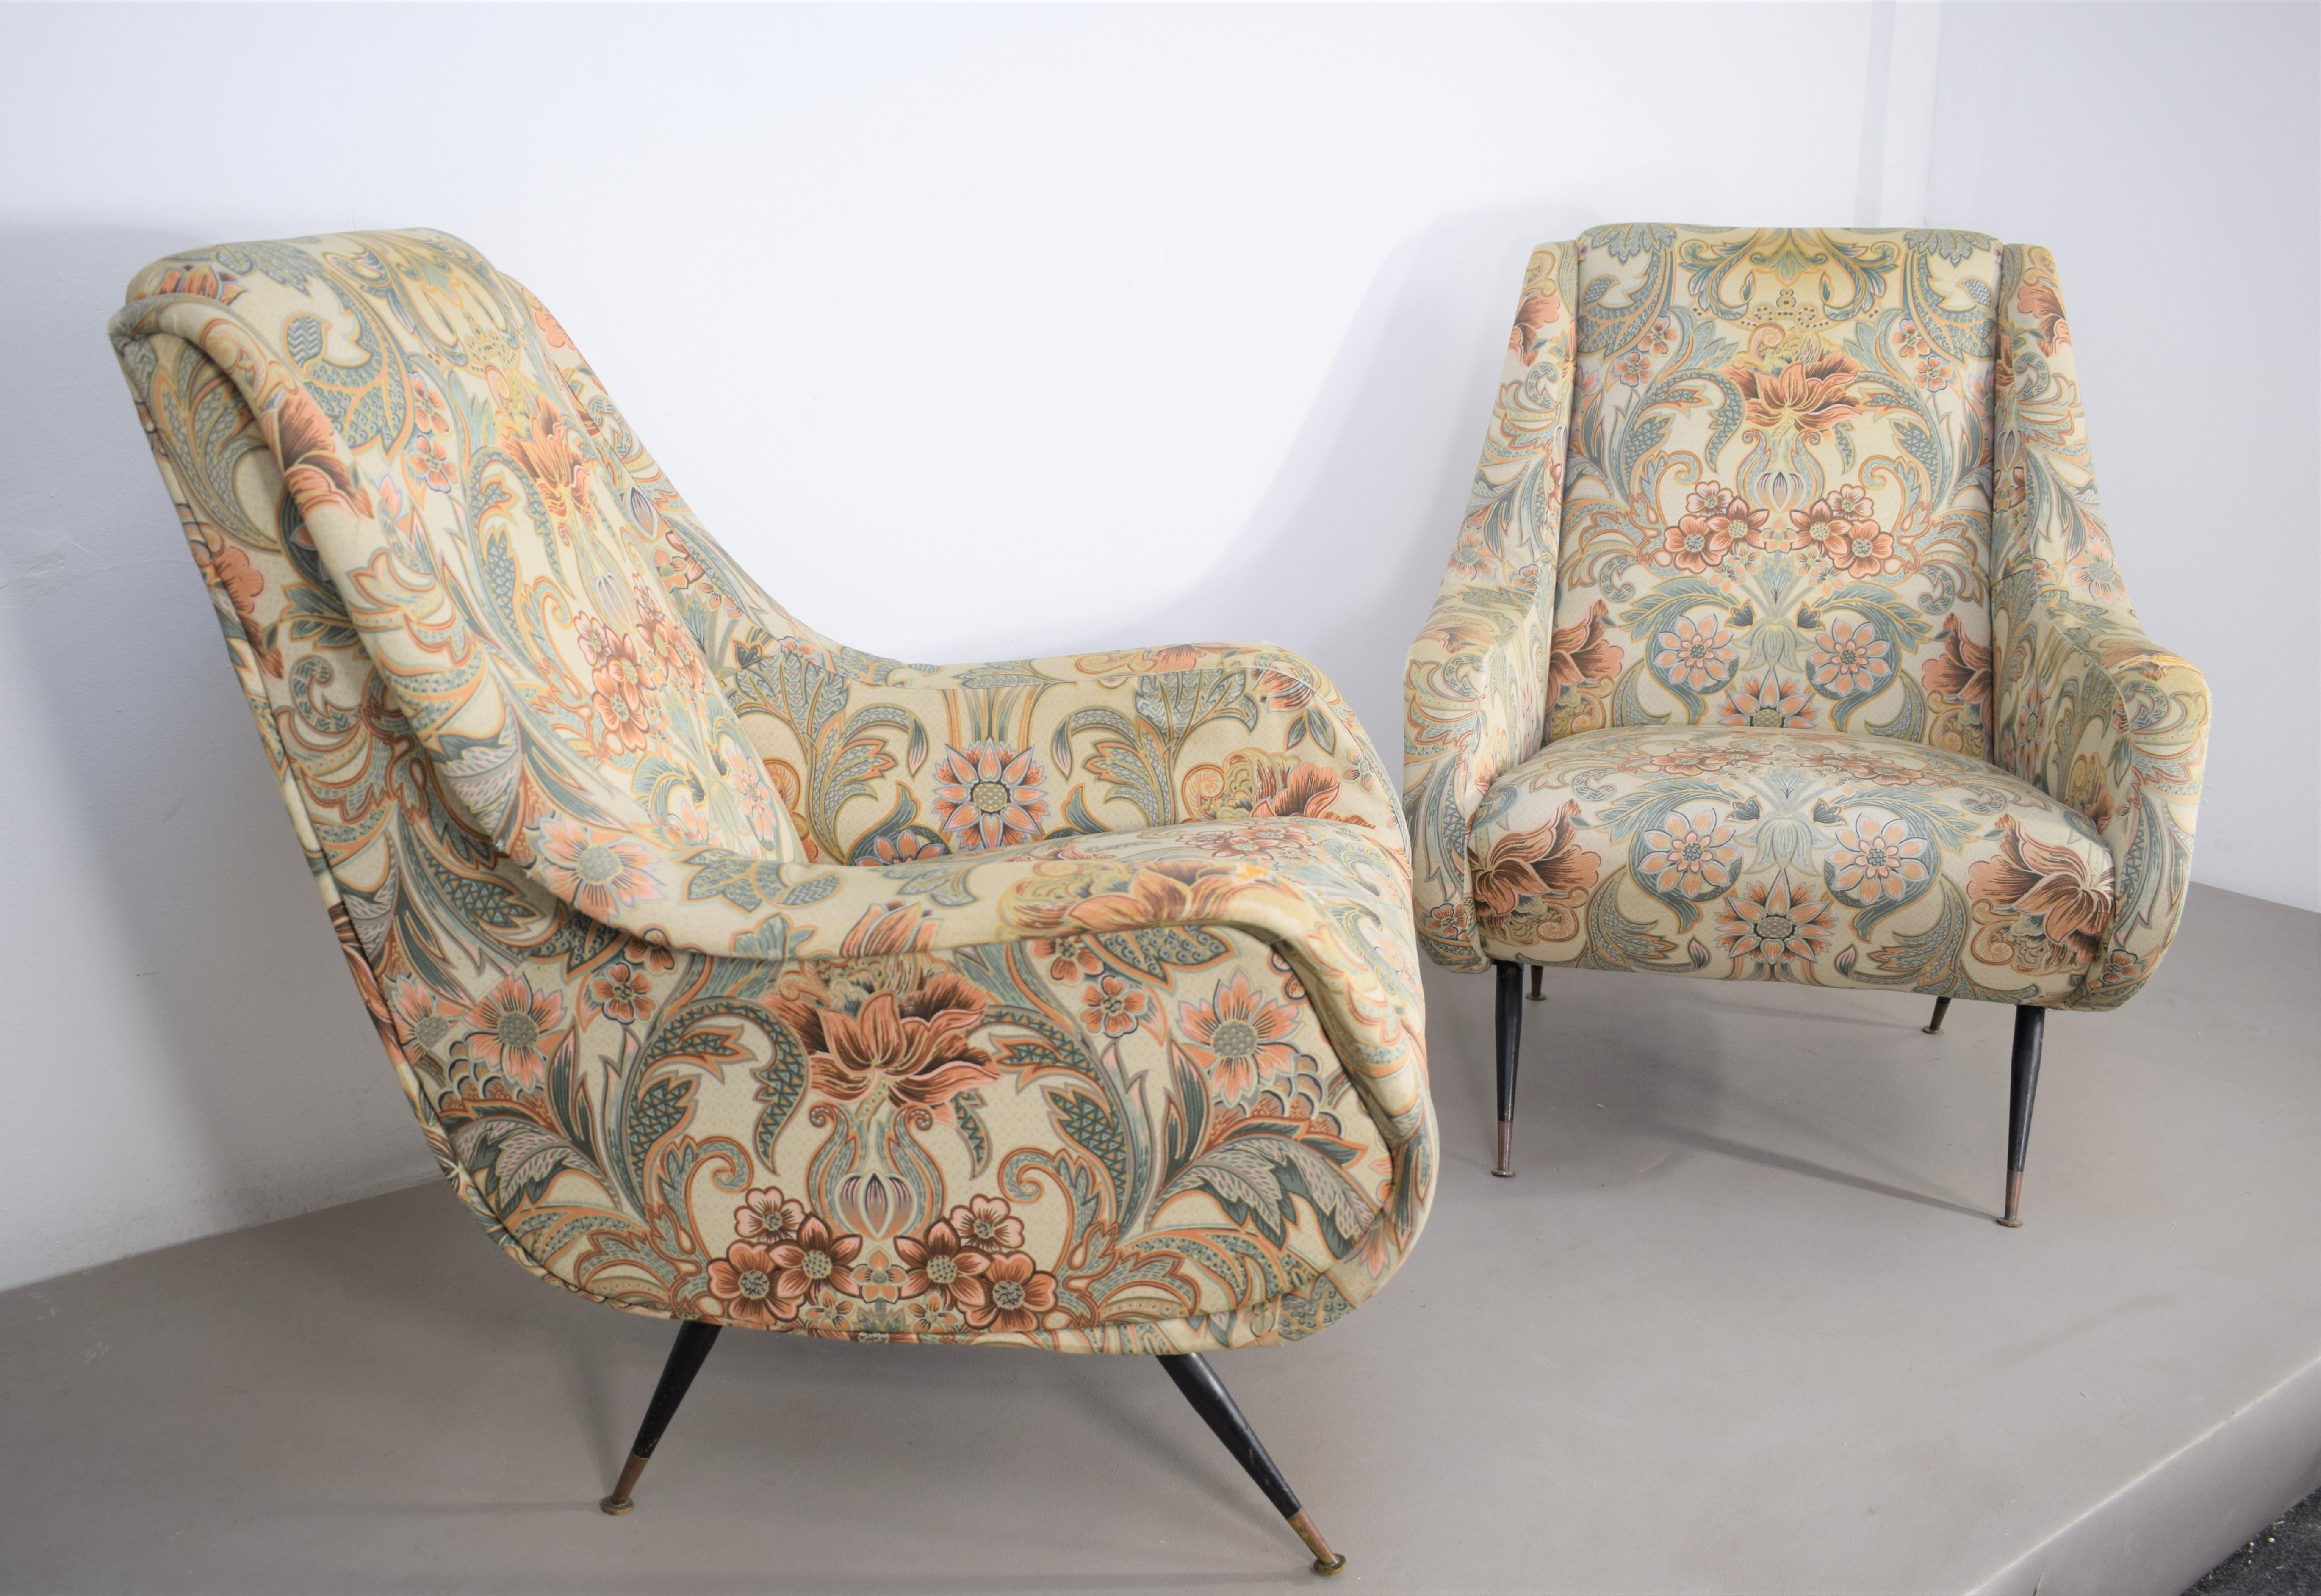 Pair of Italian armchairs by Aldo Morbelli for ISA, 1950s.

Dimensions: H= 85 cm; W= 69 cm; D= 83 cm; H seat= 38 cm.